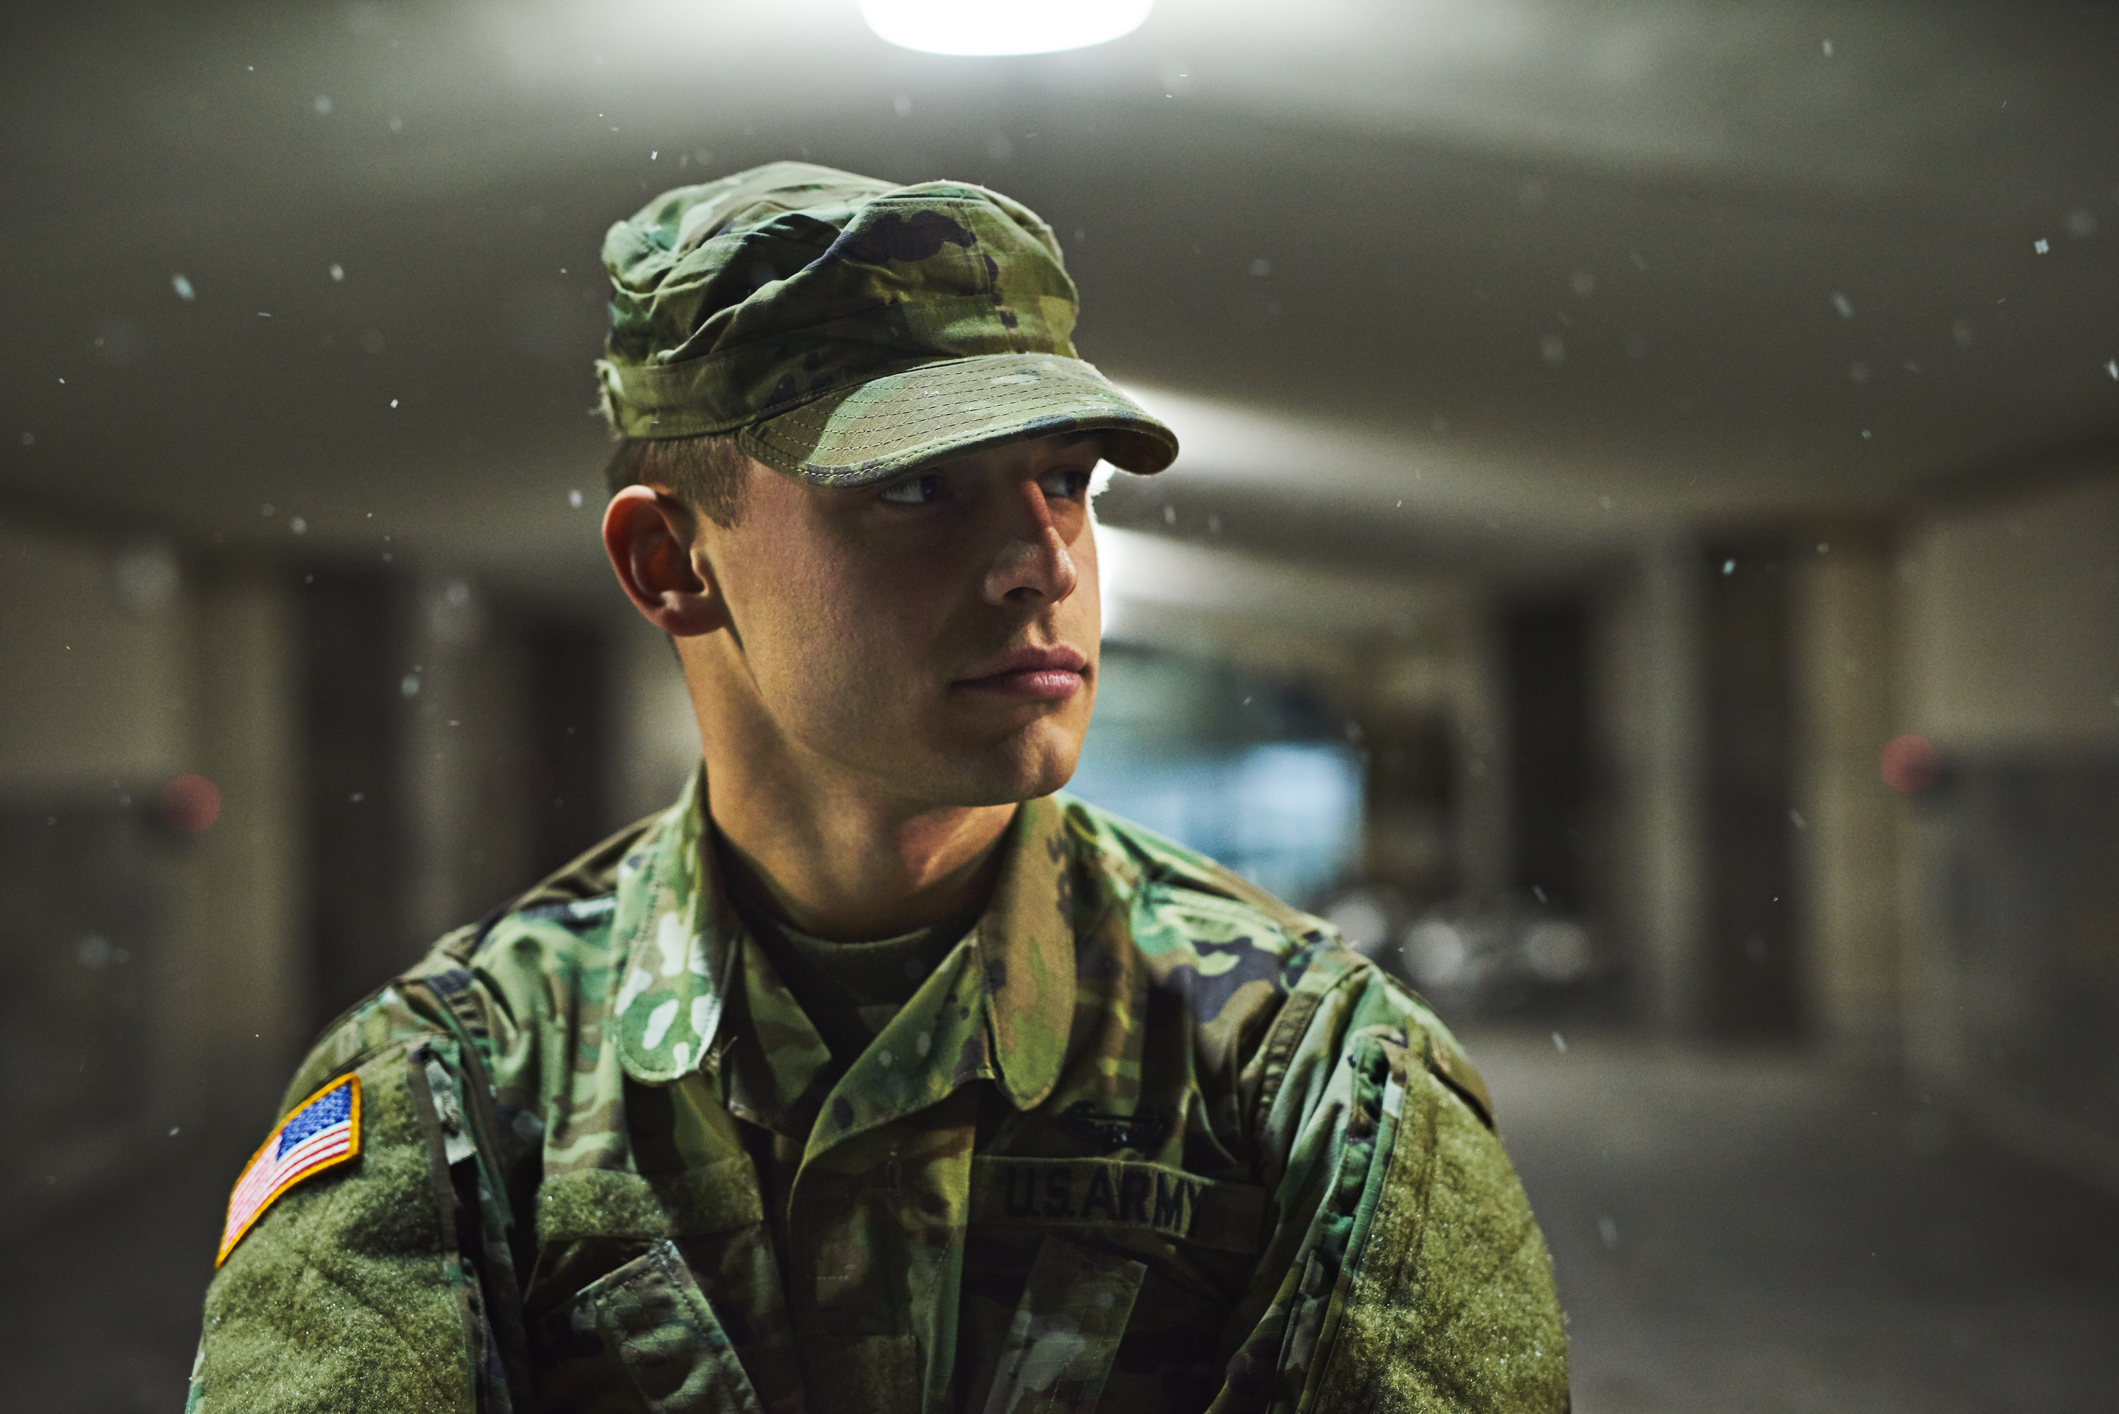  a young soldier standing outside on a cold night at a military academy